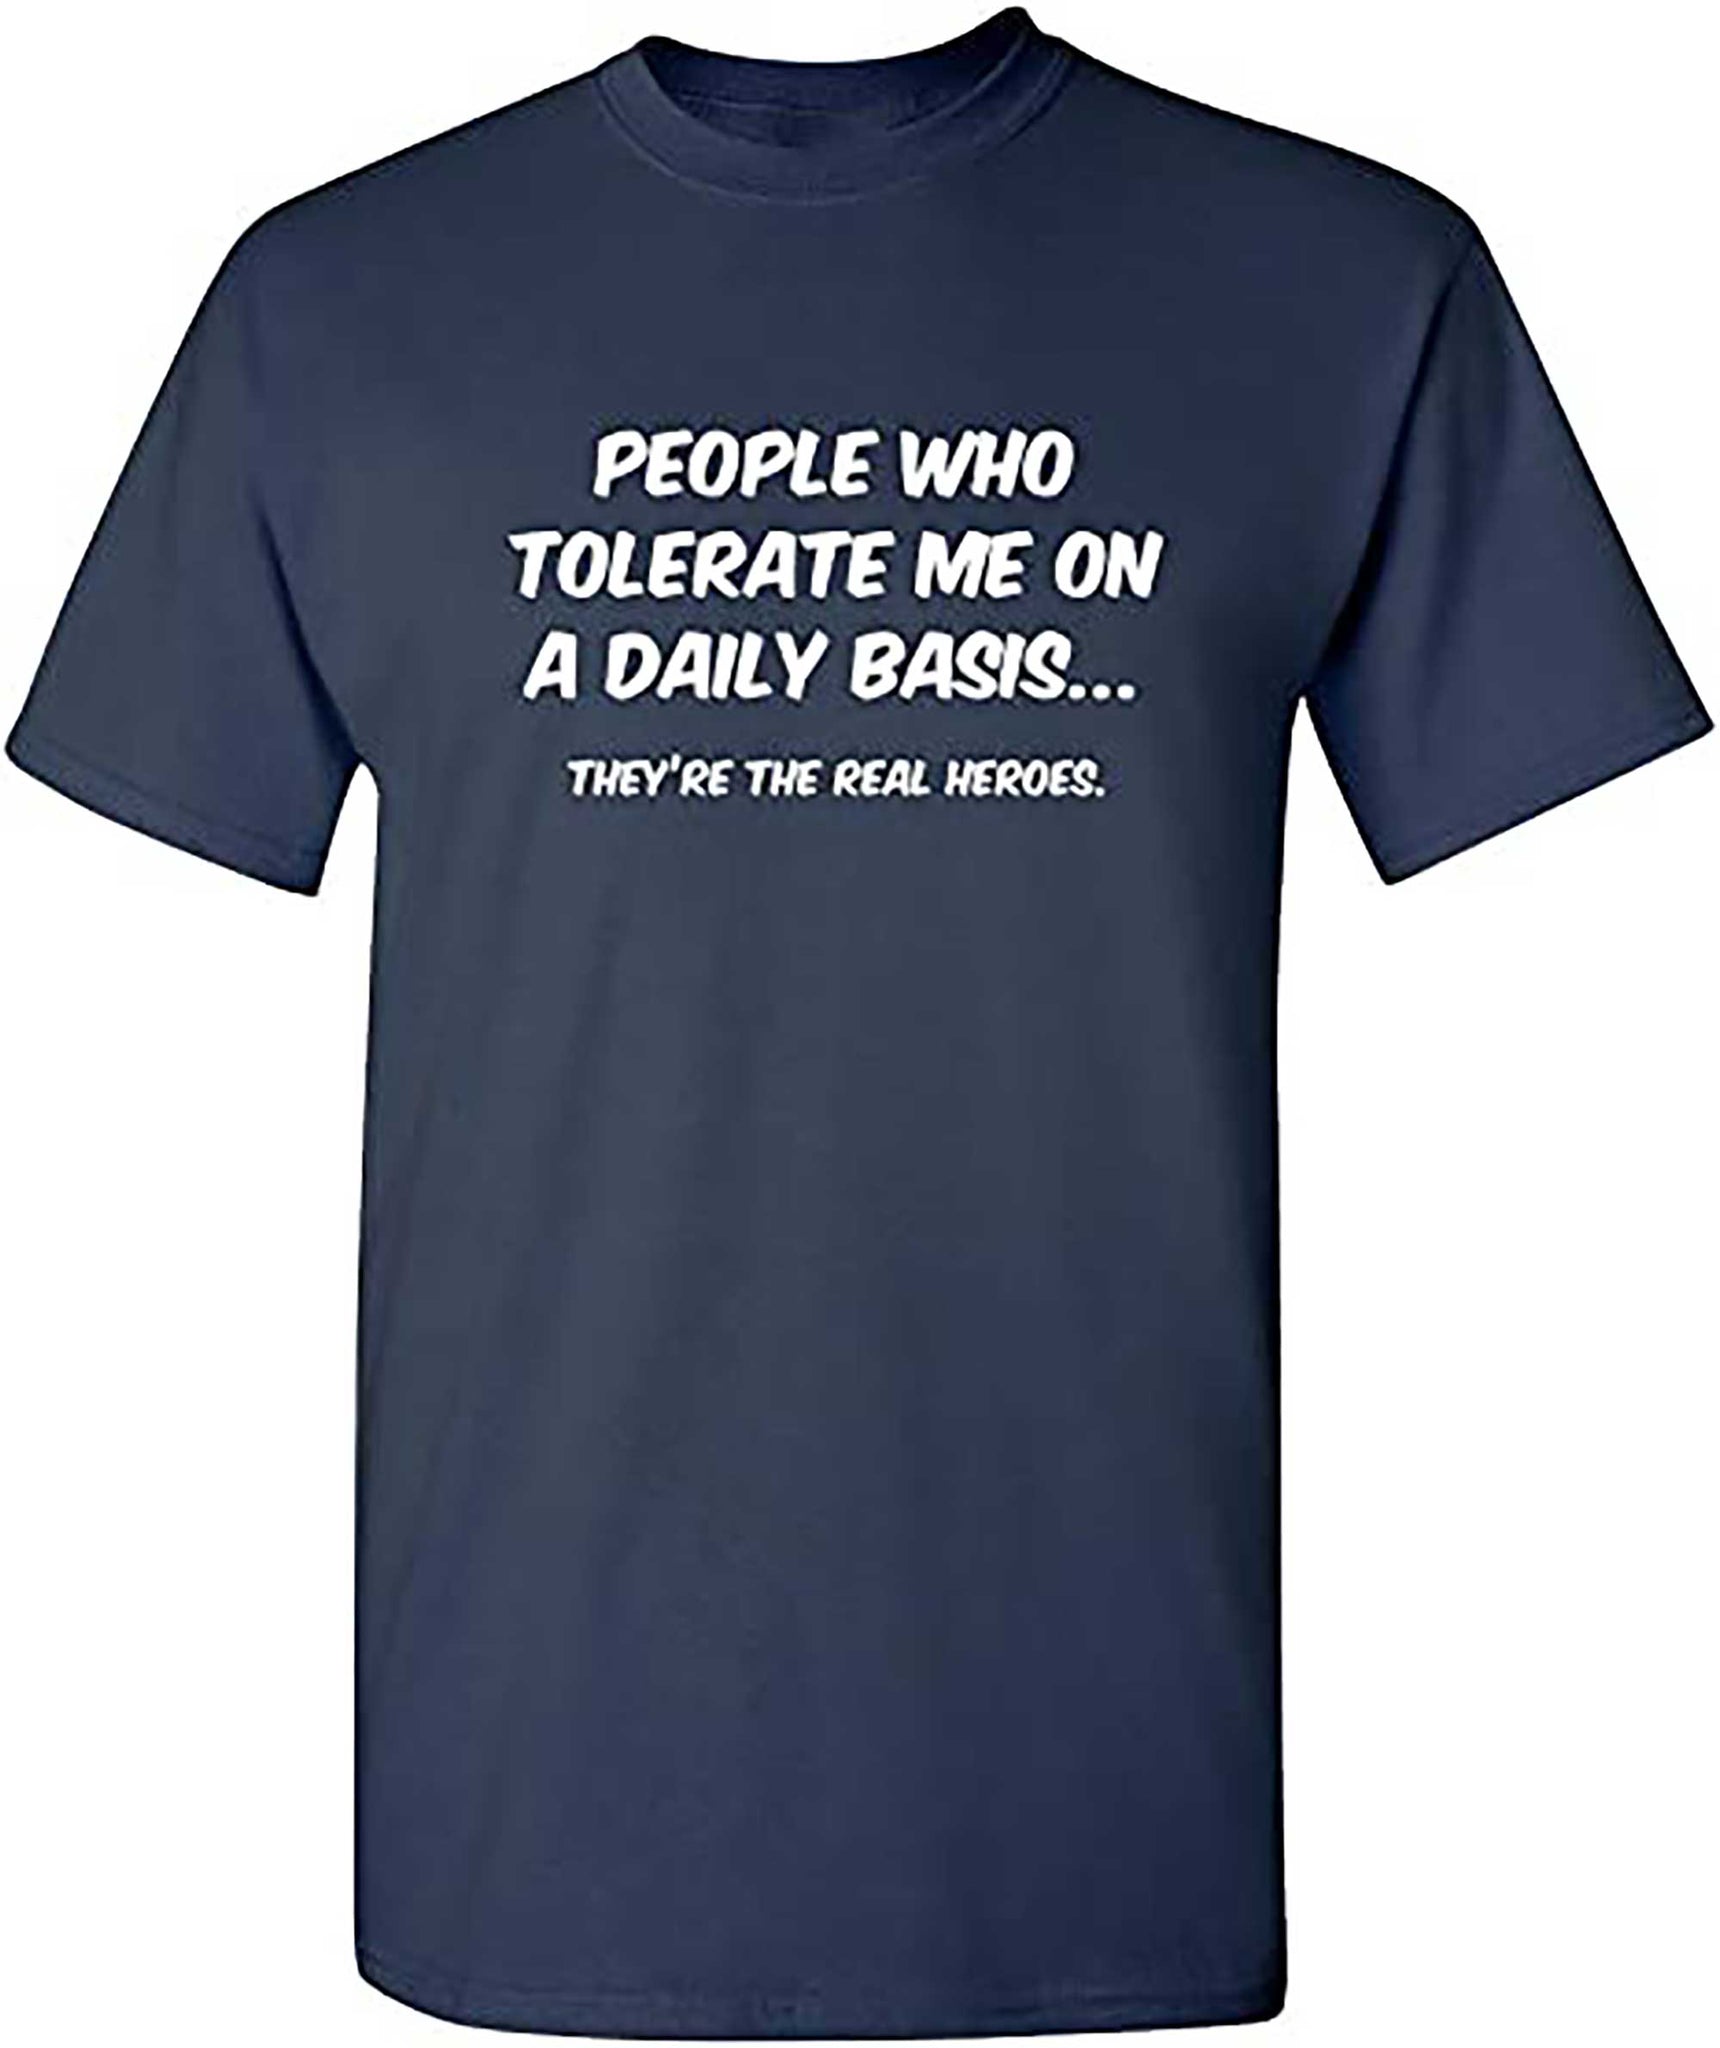 Skitongifts People Who Tolerate Me On A Daily Basis Sarcastic Graphic Novelty Funny T Shirt